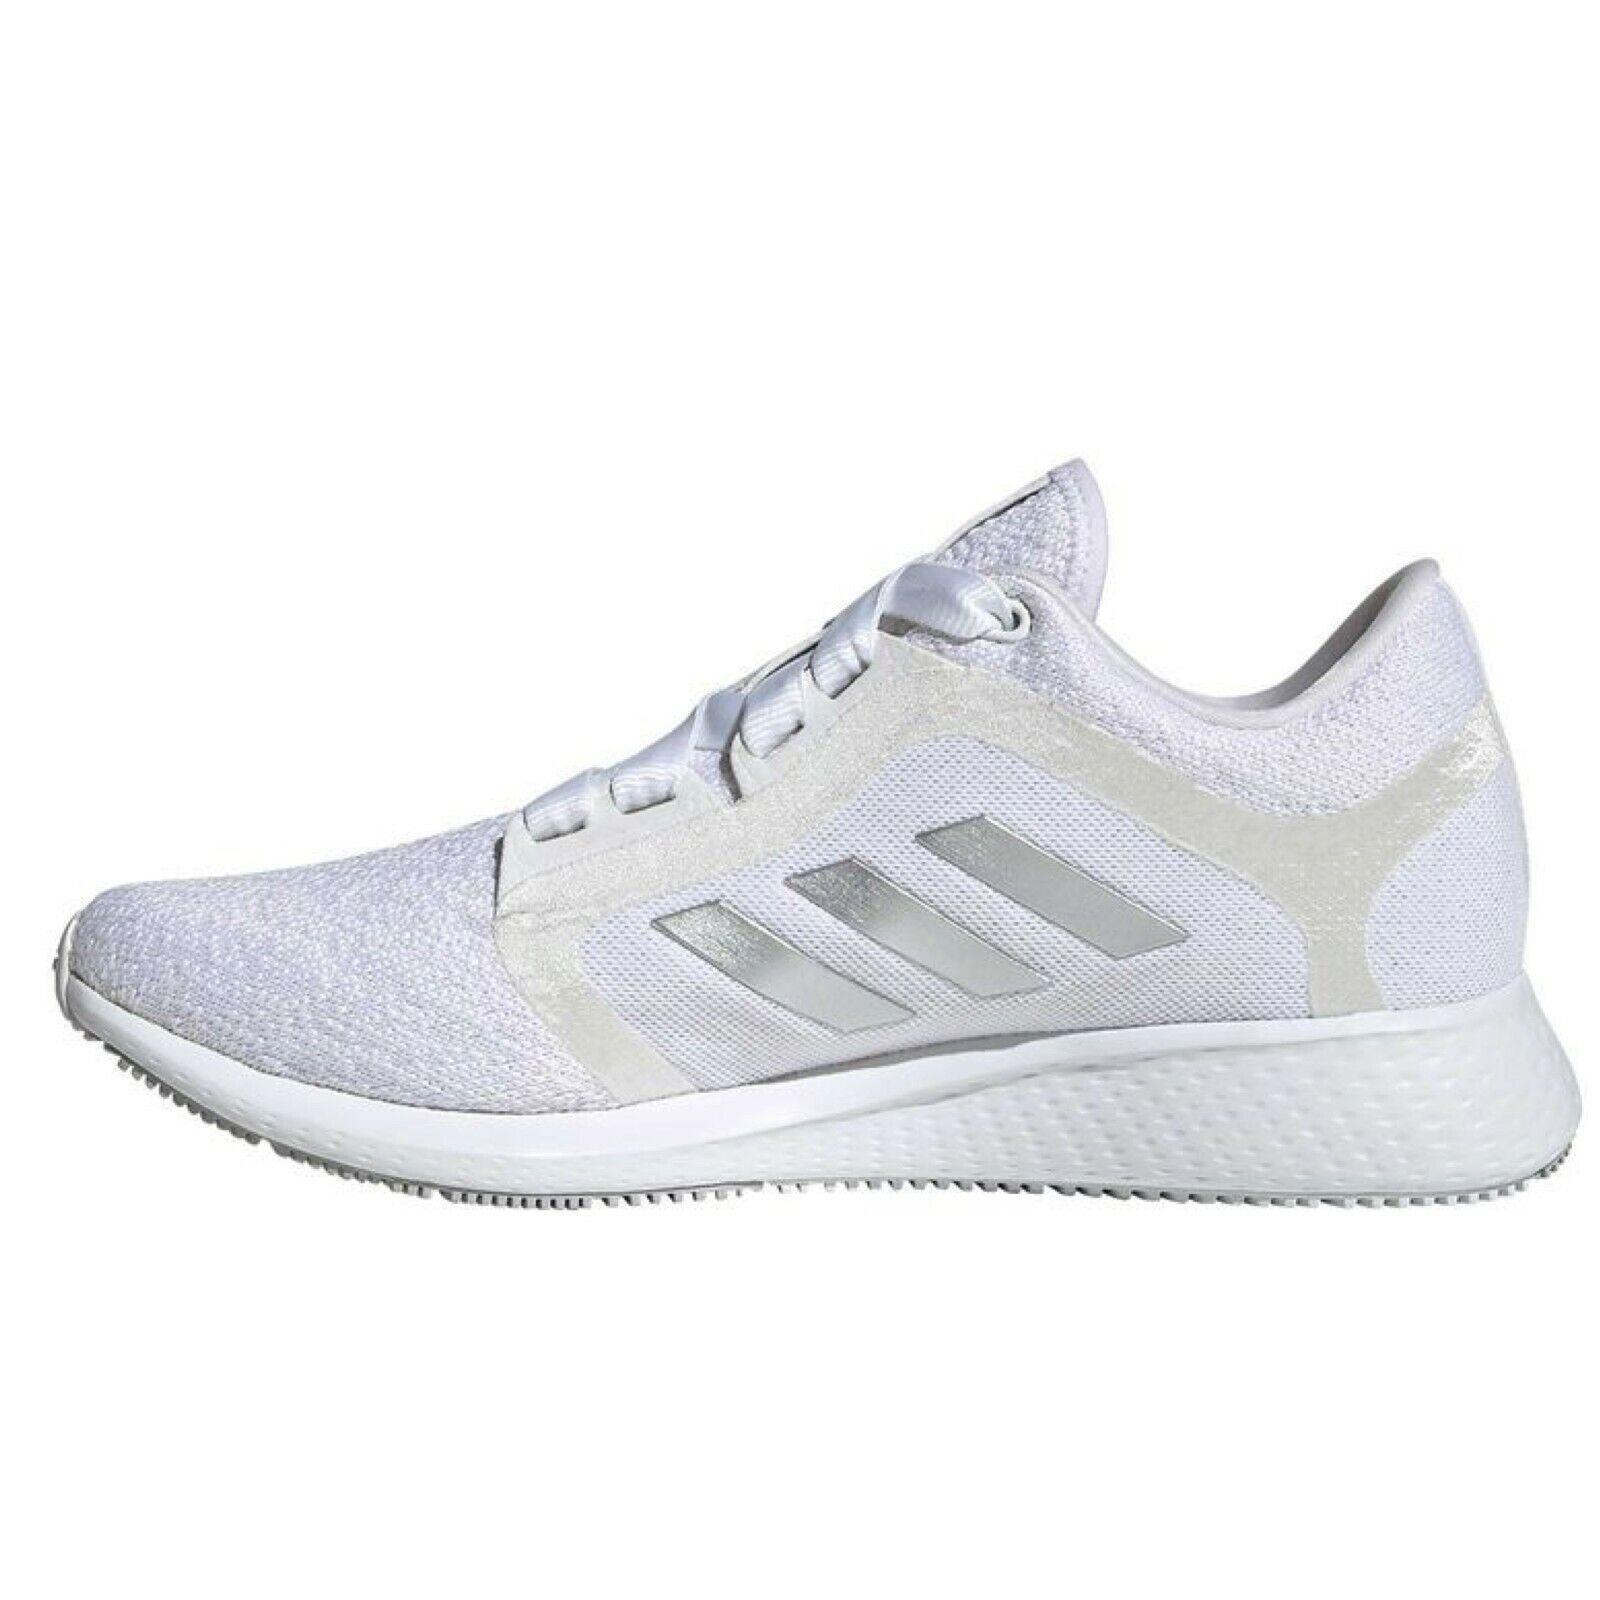 Adidas shoes Edge Lux - White , WHITE/SILVER Manufacturer 1